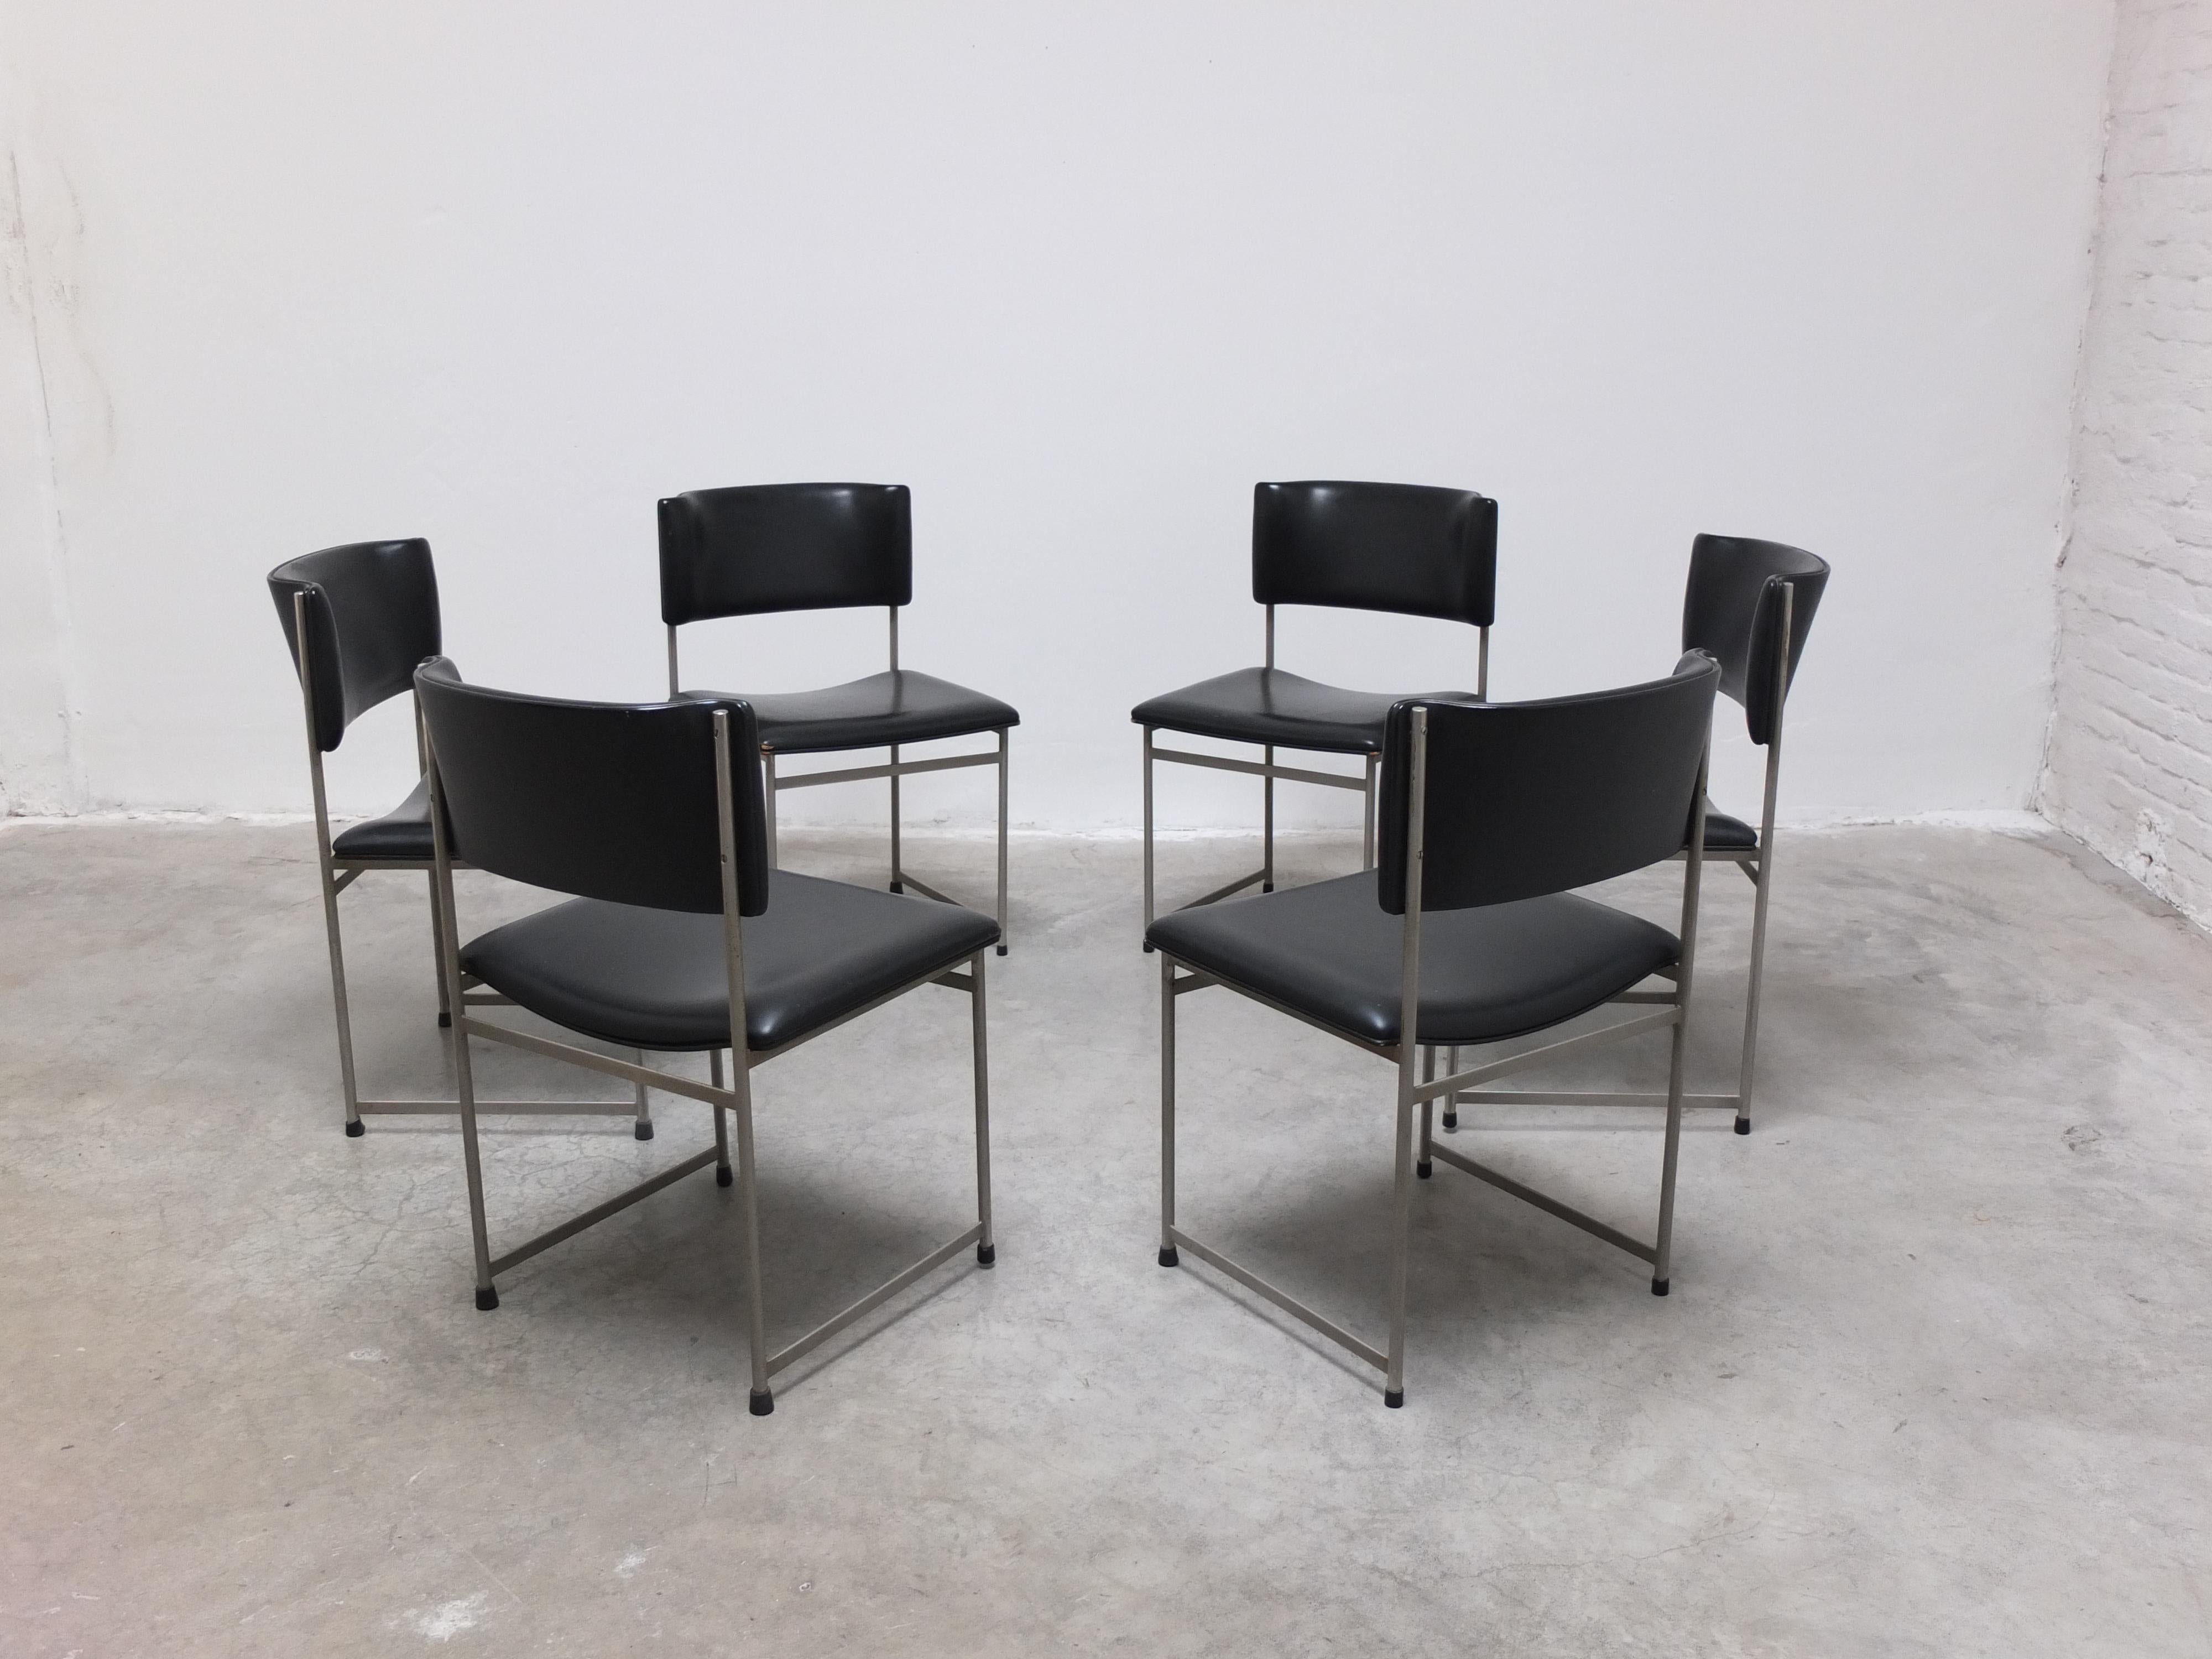 Great set of 6 ‘SM08’ dining chairs designed by Cees Braakman for Pastoe during the 1960s. A beautiful minimalist design which features a sleek metal frame combined with the original black leatherette upholstery. These chairs come from the first